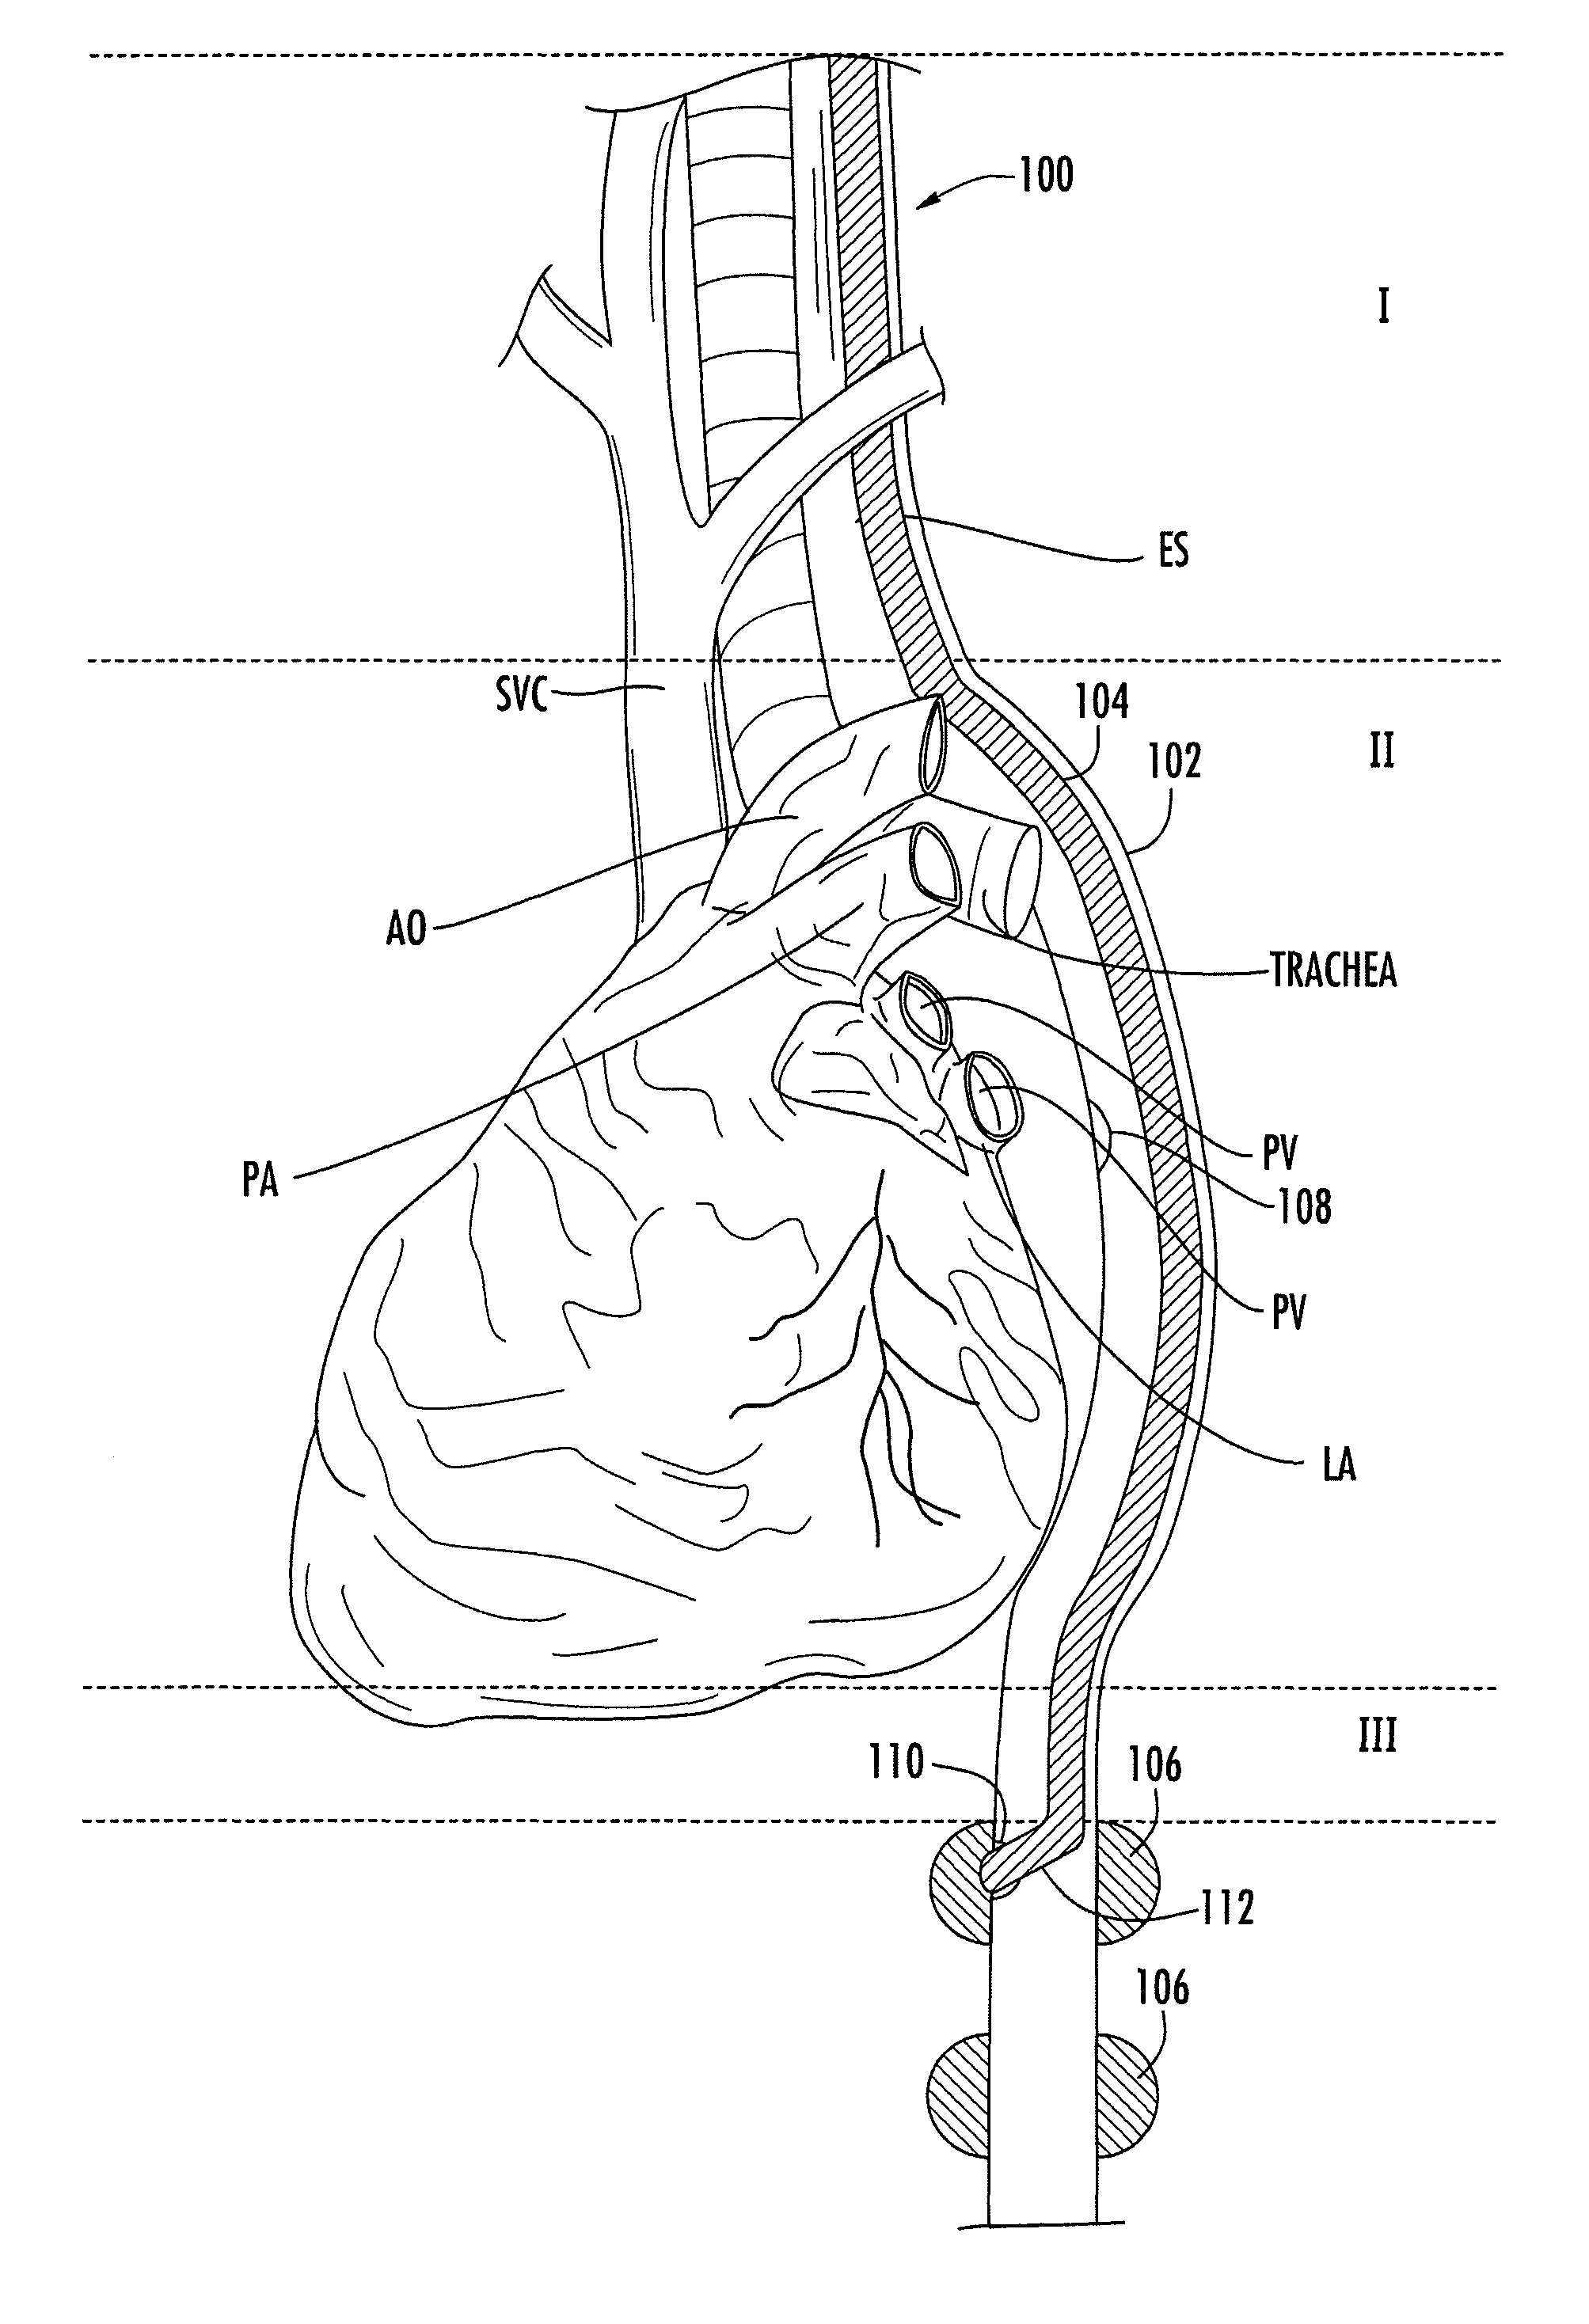 Nasogastric tube for use during an ablation procedure